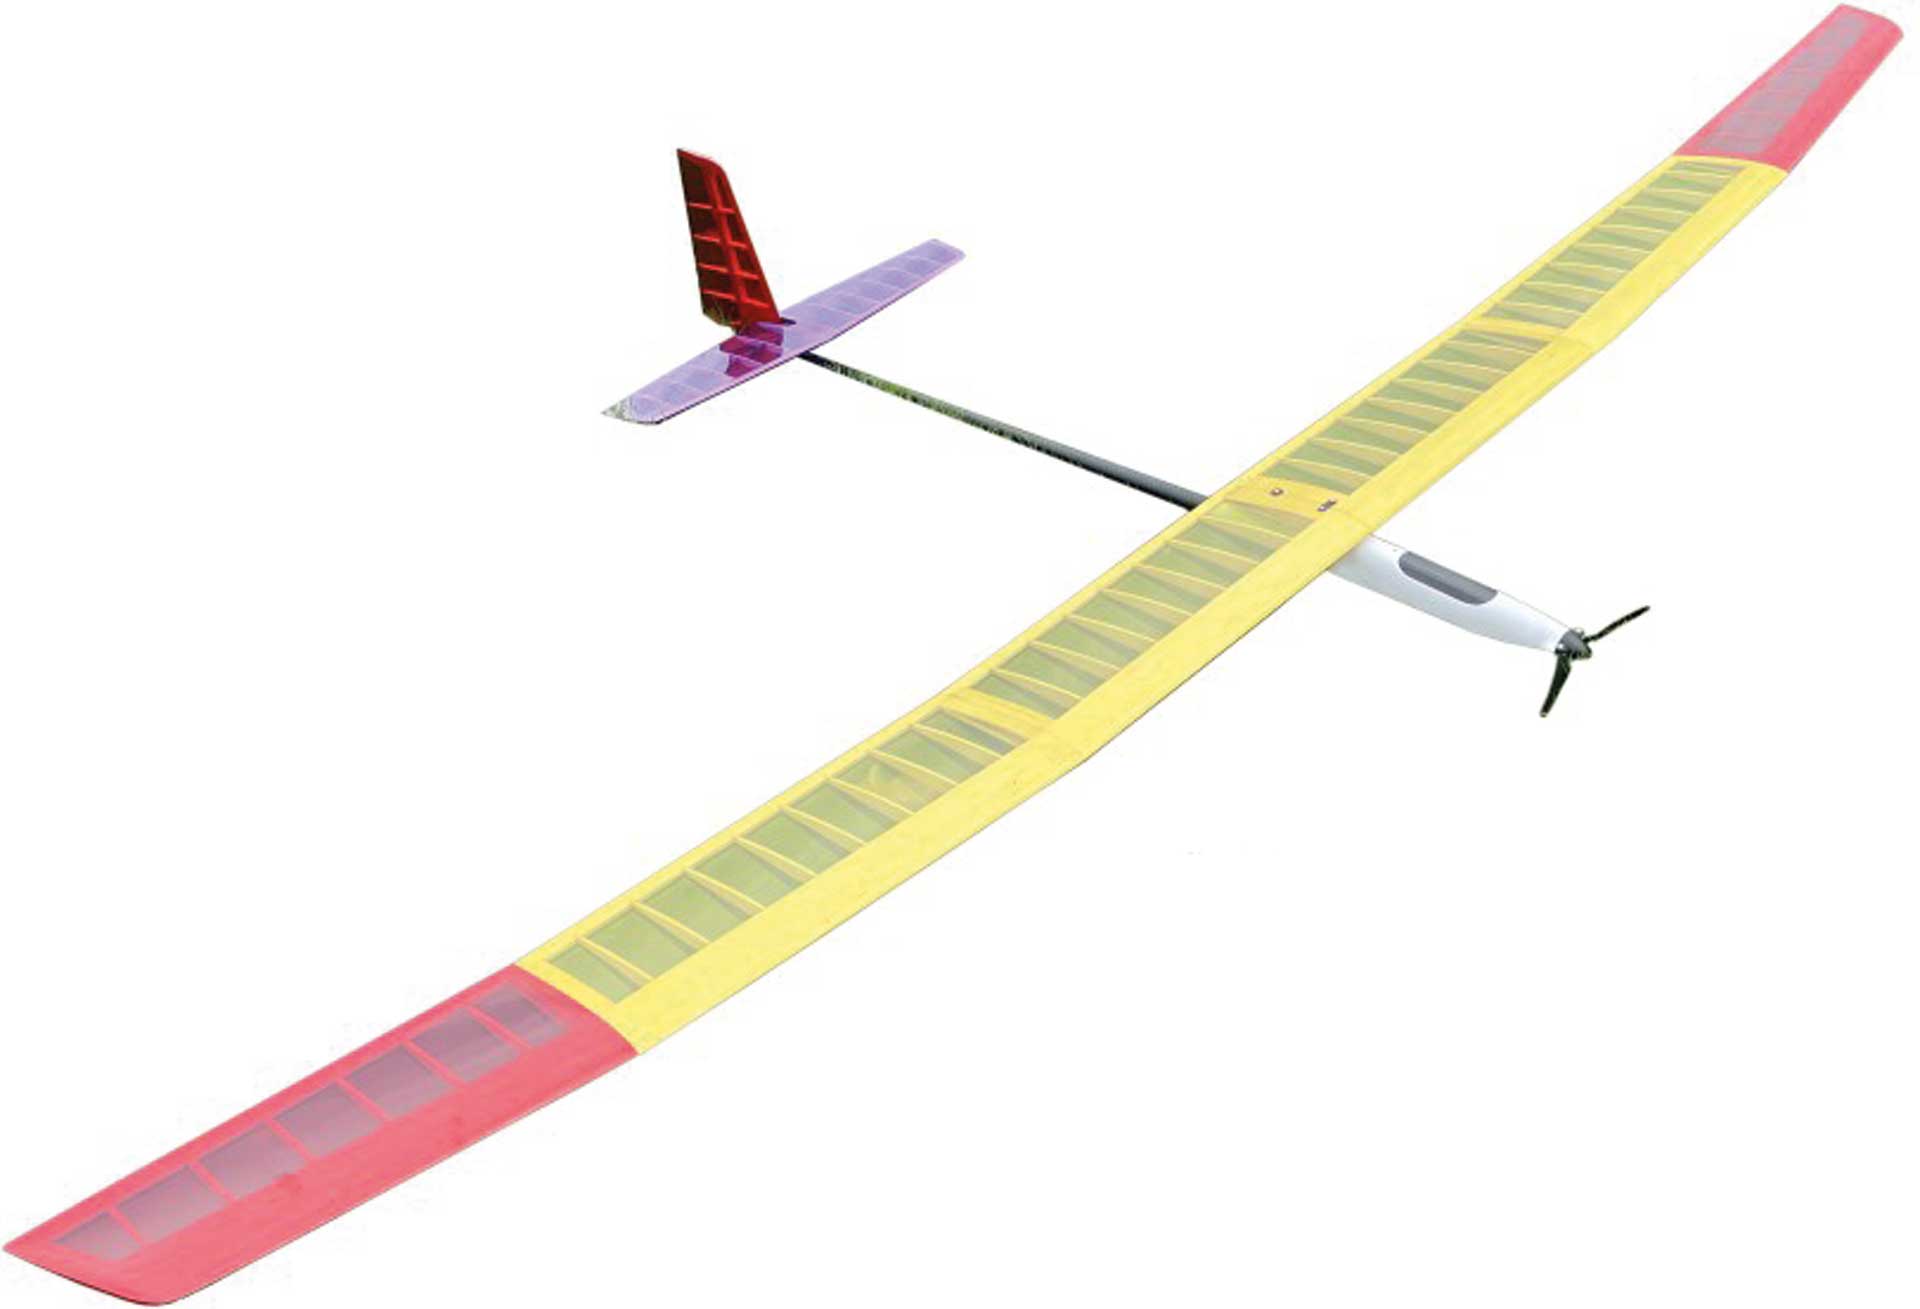 VALUEPLANES VP2600 Glider kit with GRP fuselage